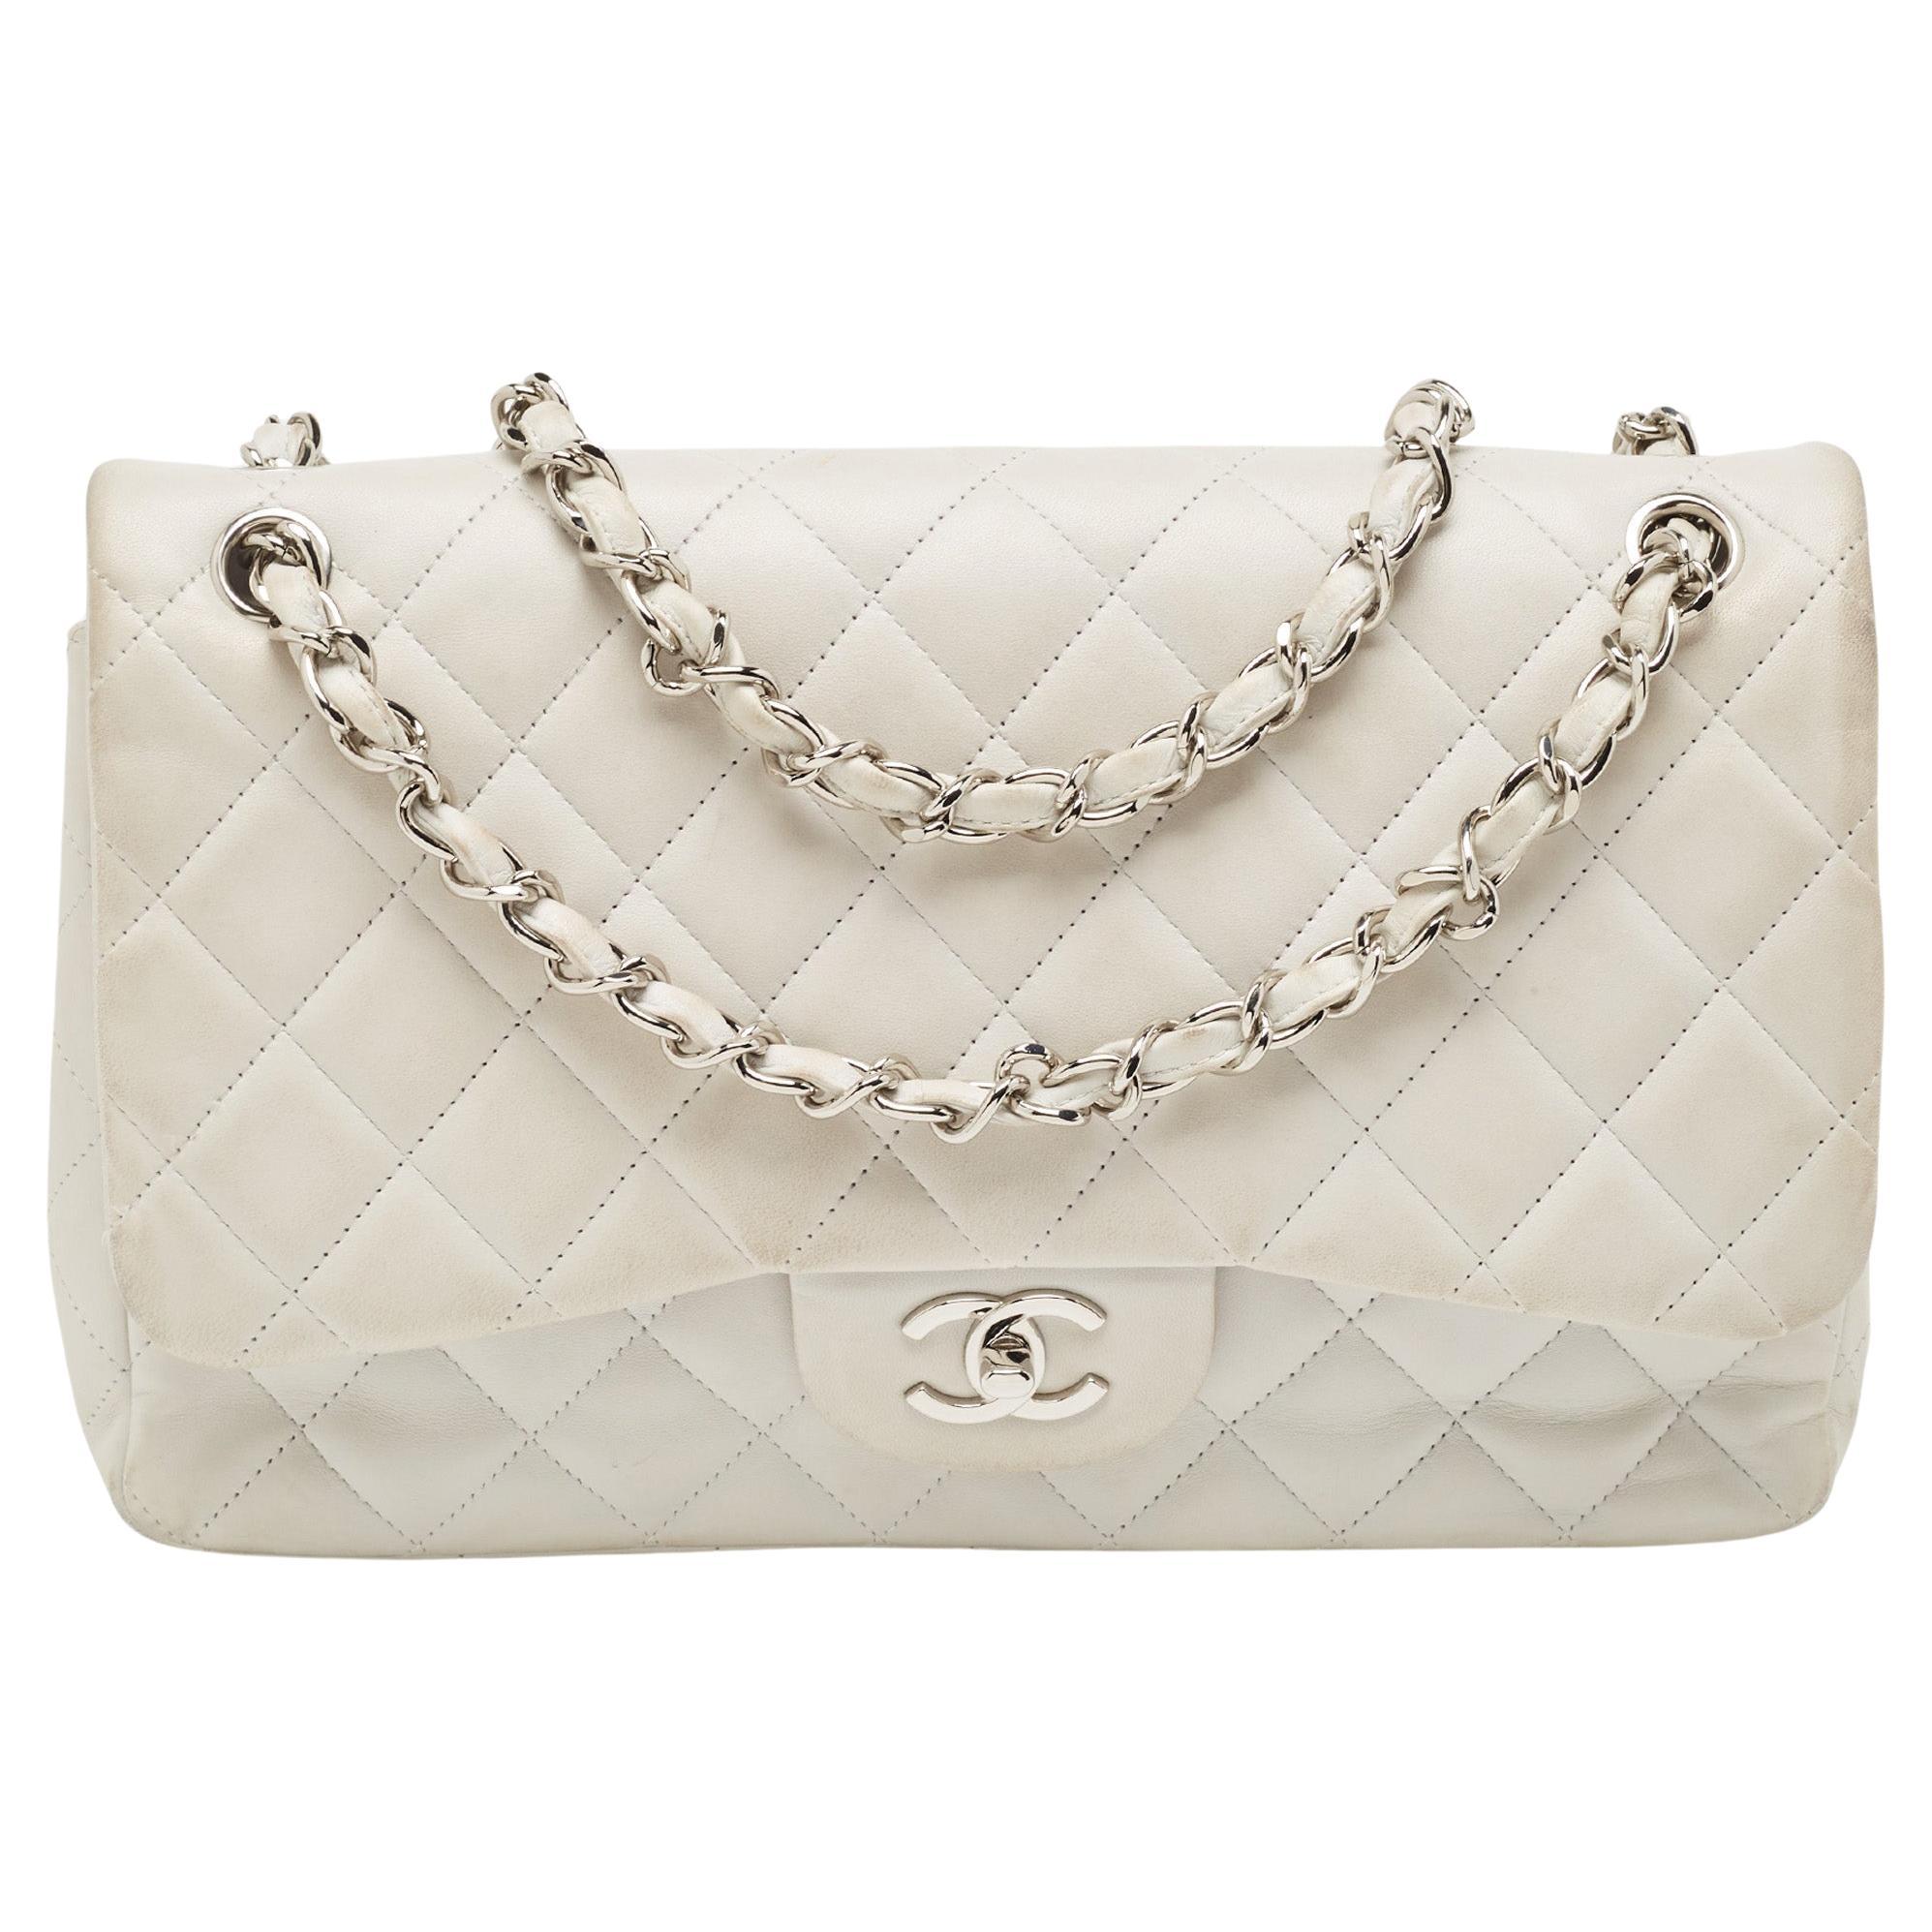 Chanel Light Grey Quilted Leather Jumbo Classic Double Flap Bag For Sale